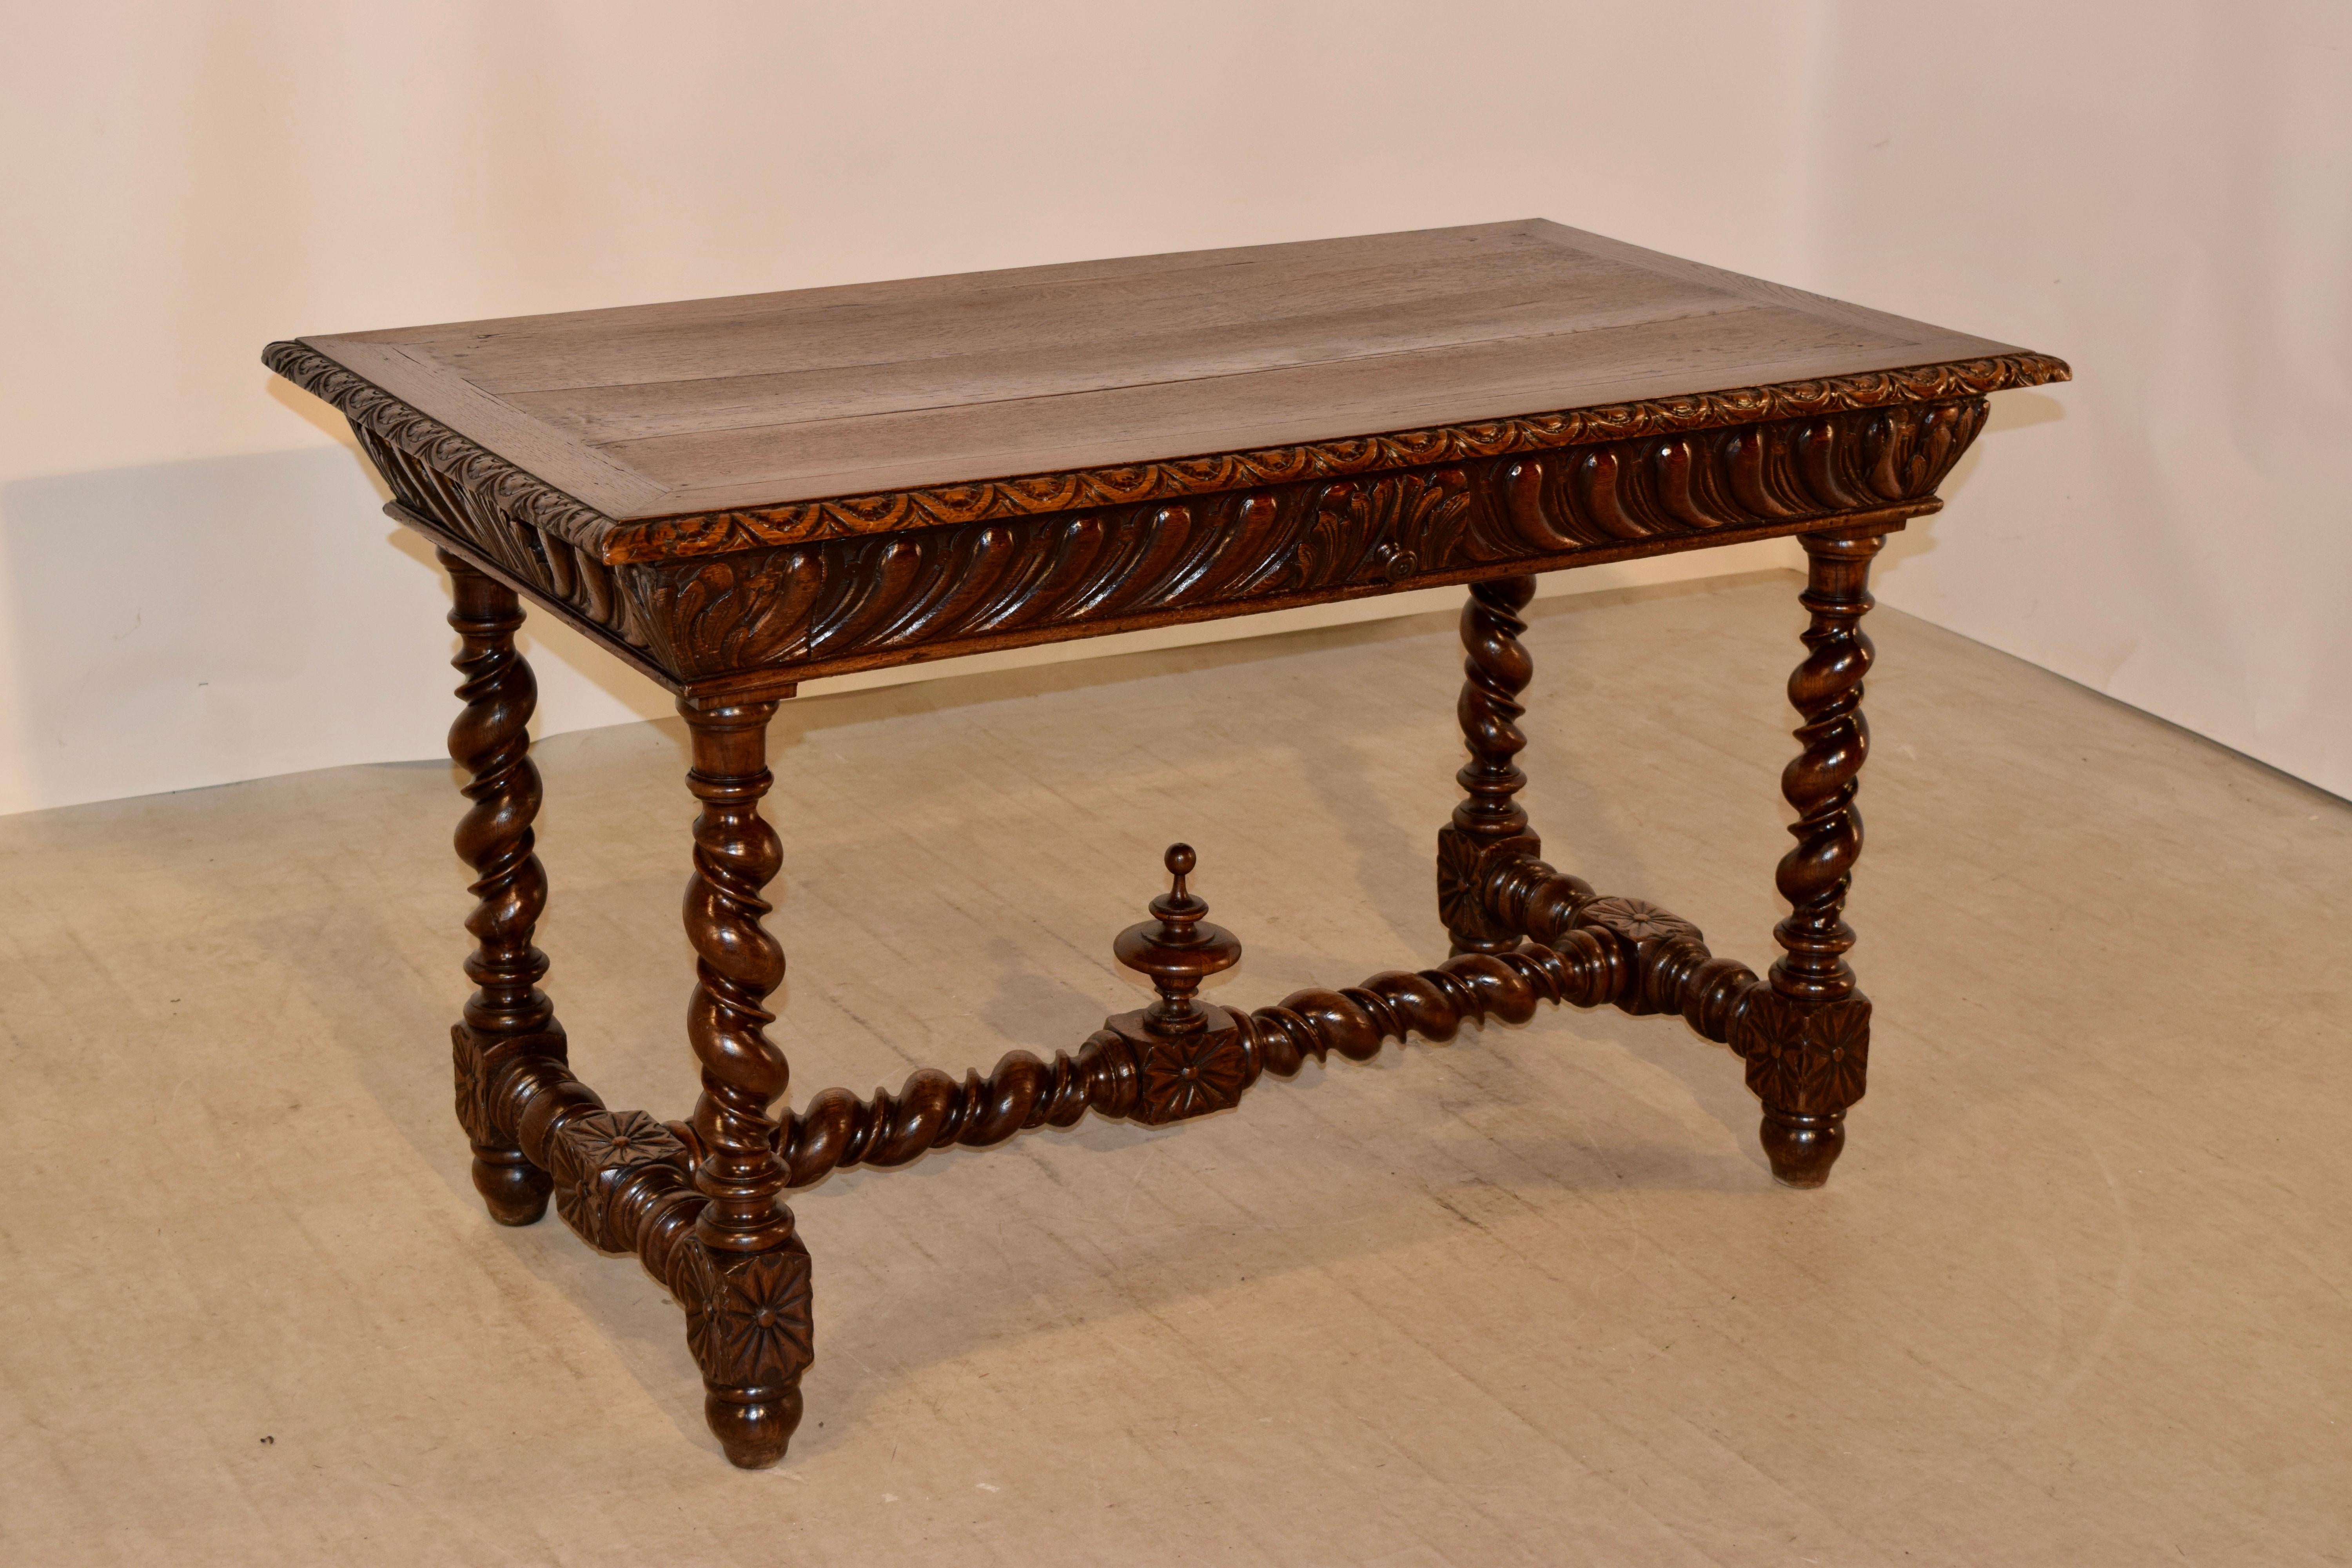 19th century oak library table from France with banded edges around the top which also has a beveled and carved decorated edge. The apron is hand carved and contains a single drawer in the front and is carved on all four sides for easy placement in